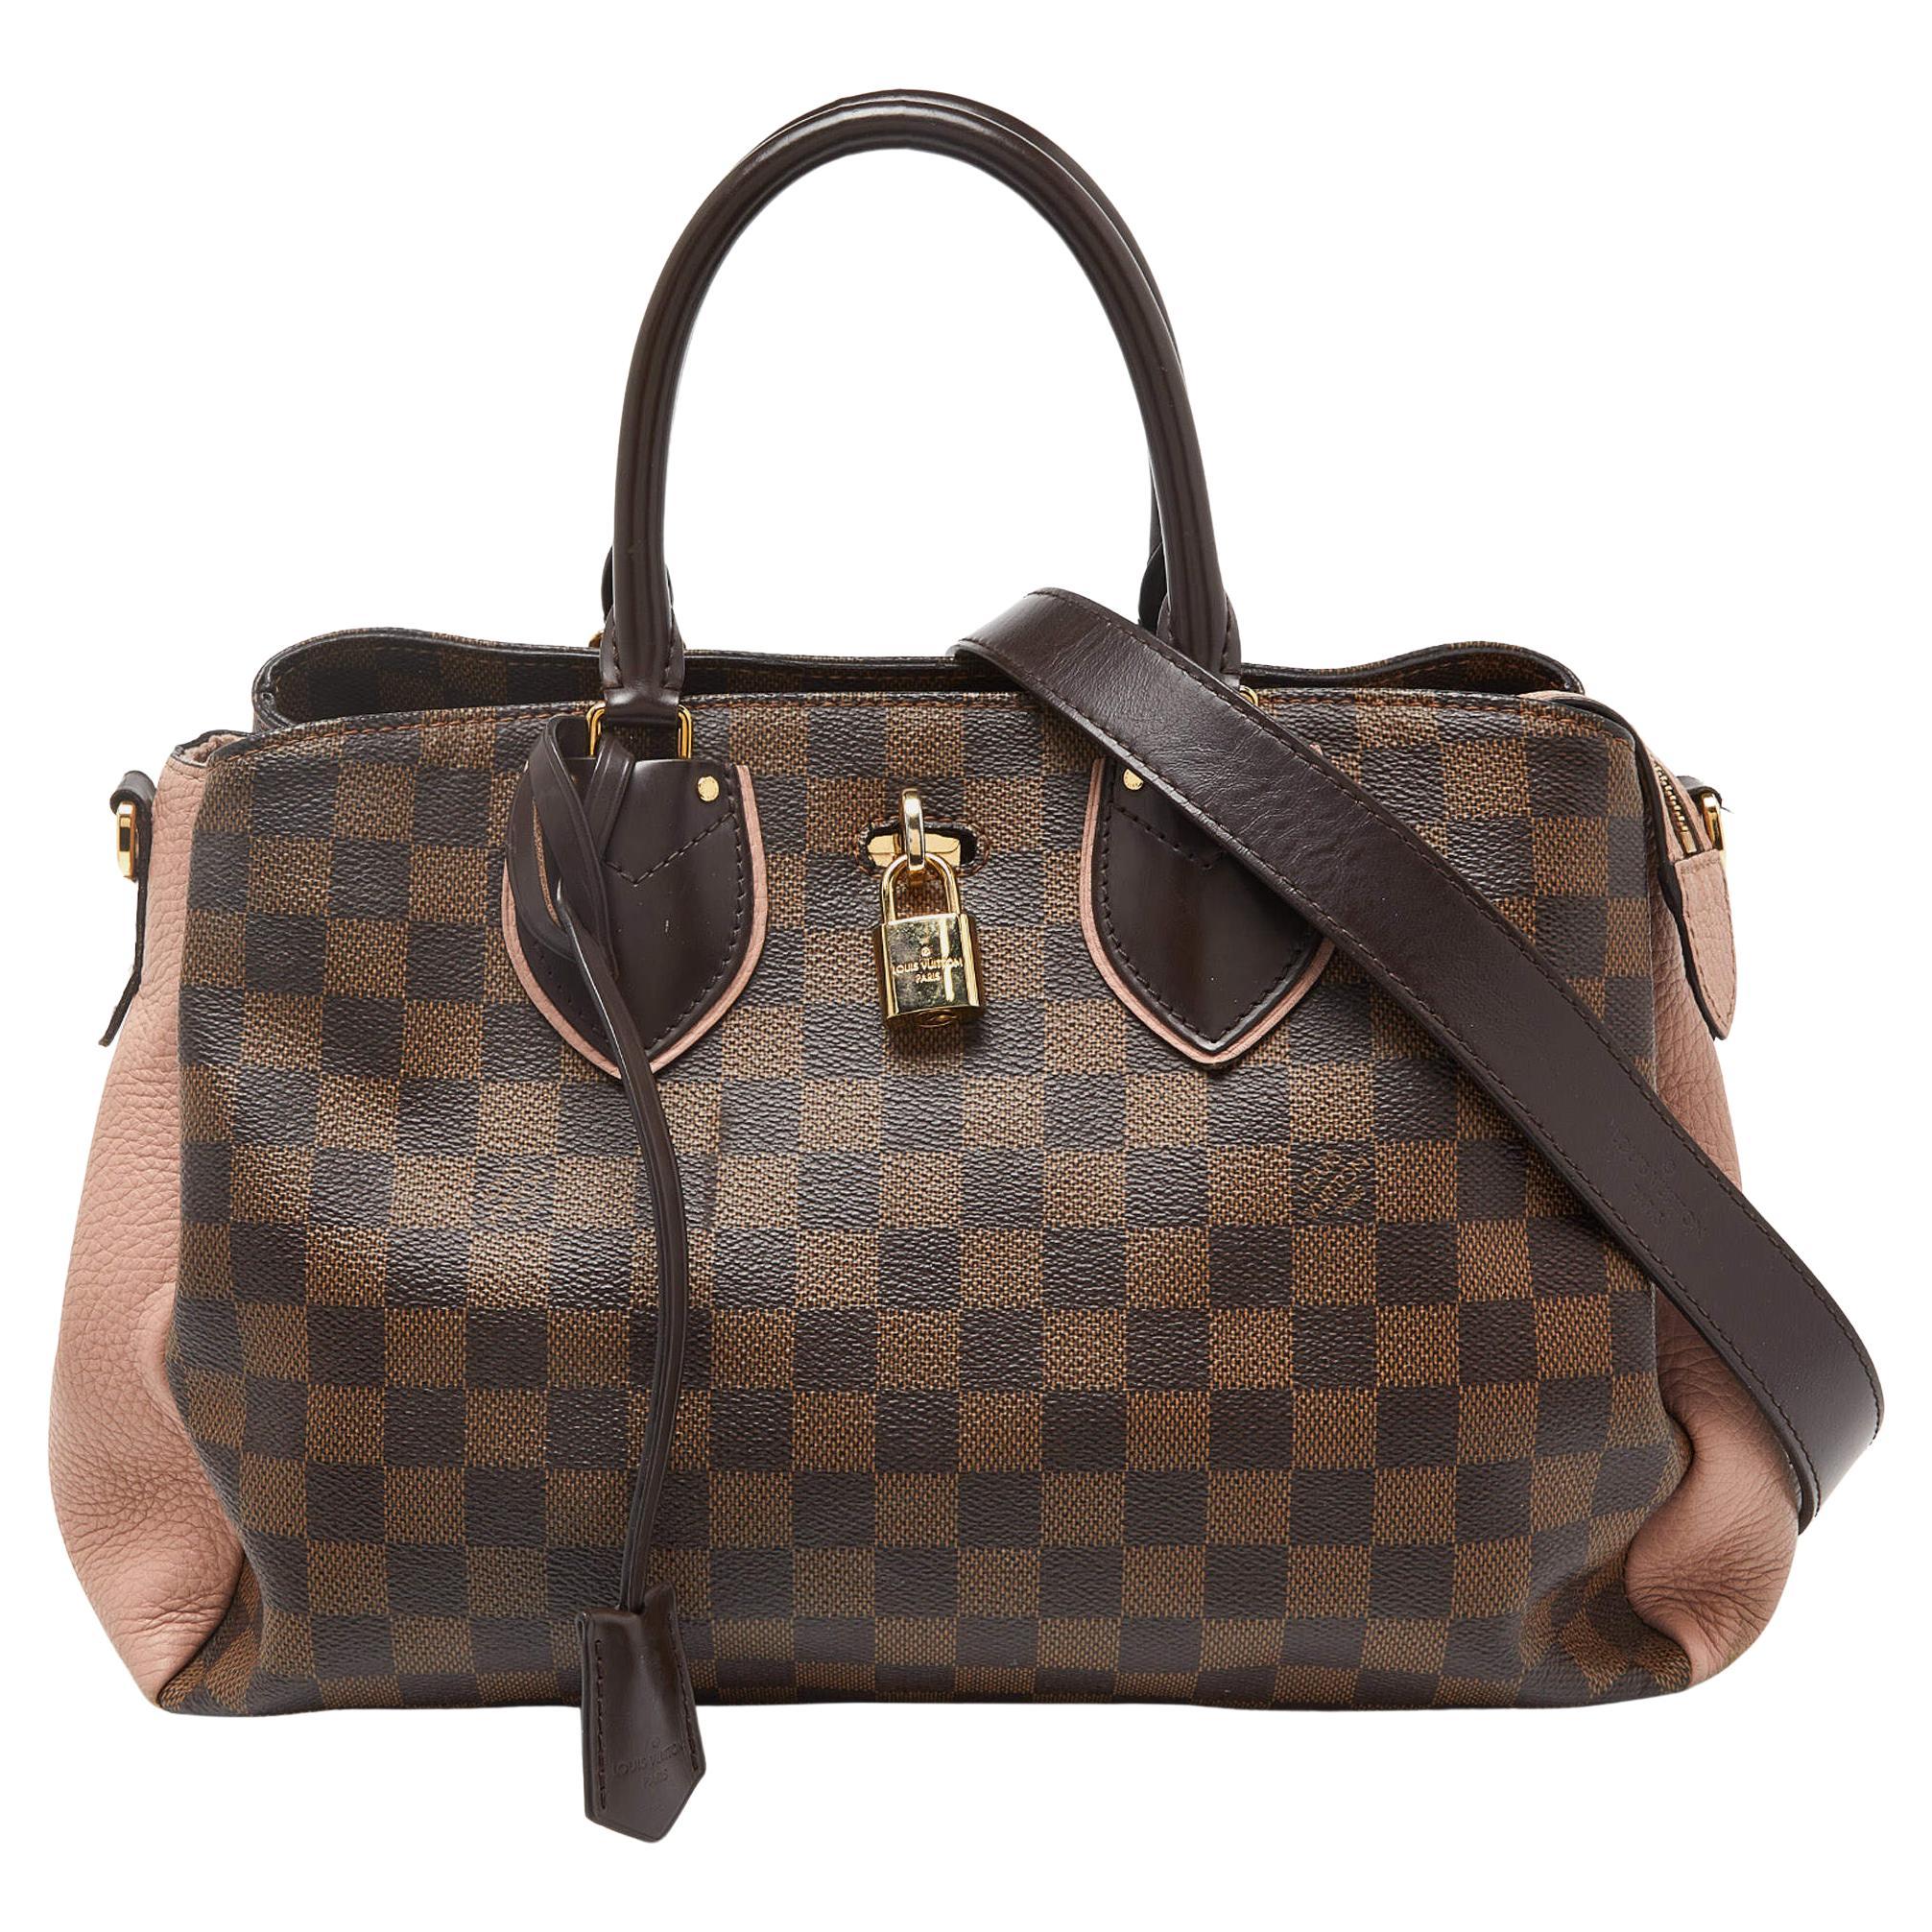 Louis Vuitton Damier Ebene Canvas and Leather Normandy Bag For Sale